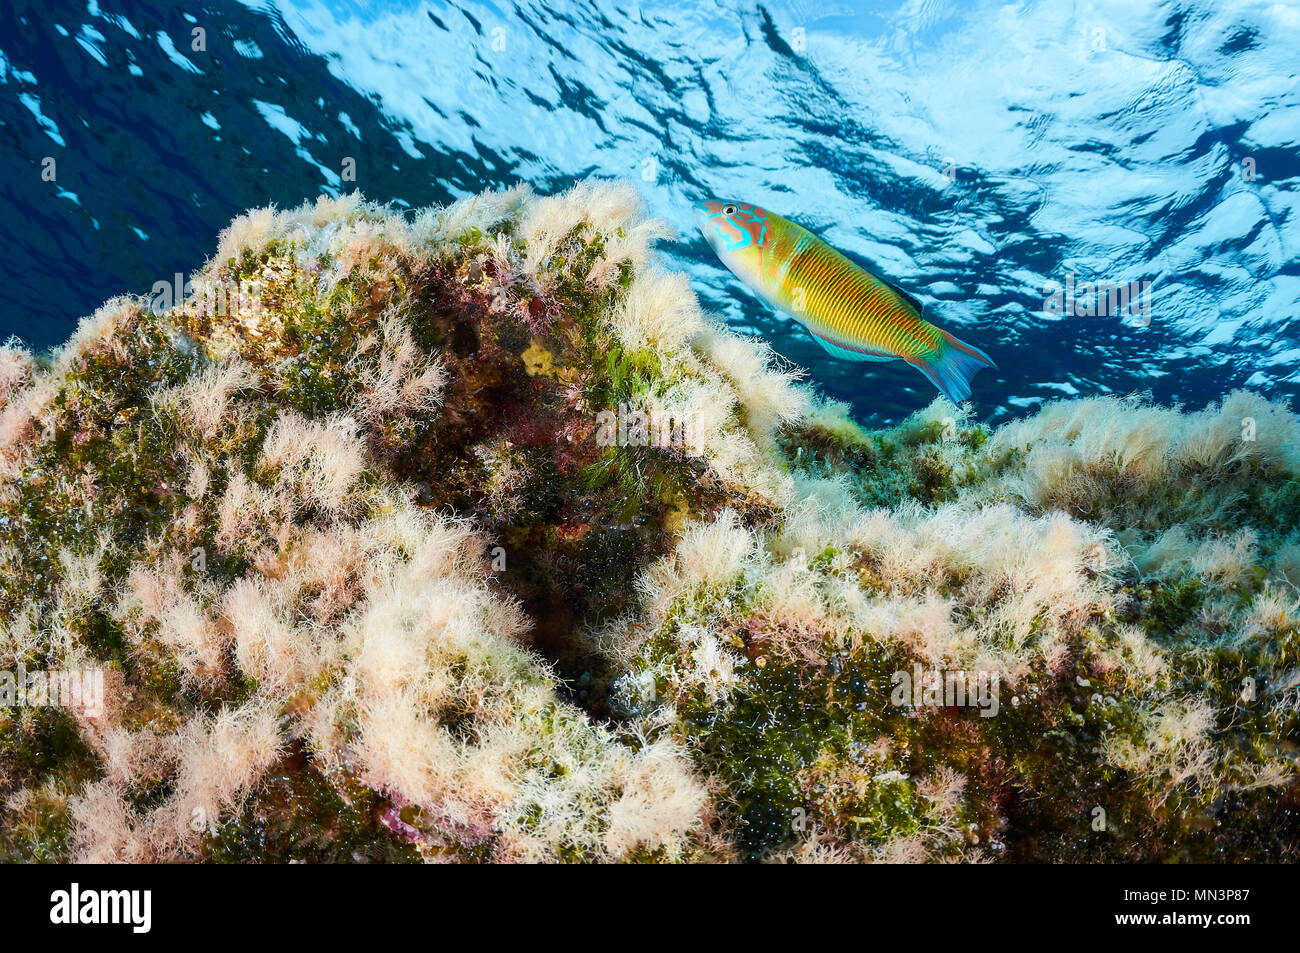 Ornate wrasse (Thalassoma pavo) with blue surface in the background at Es Vedrá islet (Ibiza,Balearic Islands, Spain) Stock Photo